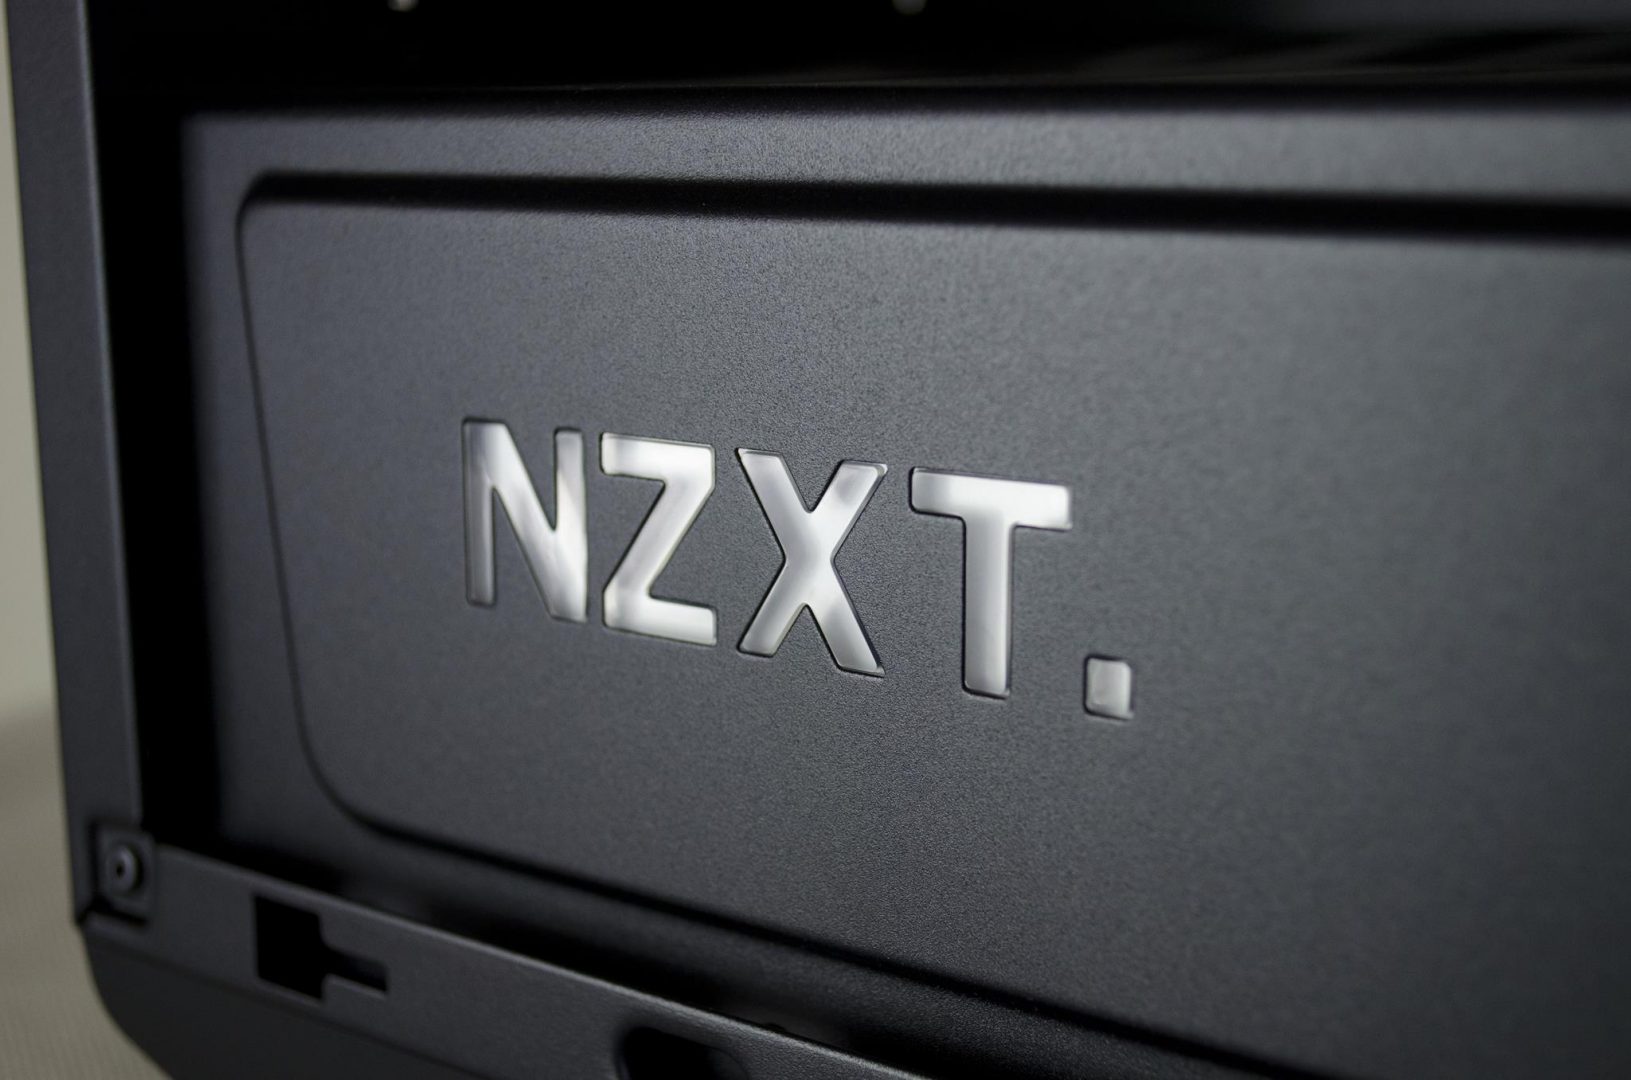 NZXT MANTA PC Case Review